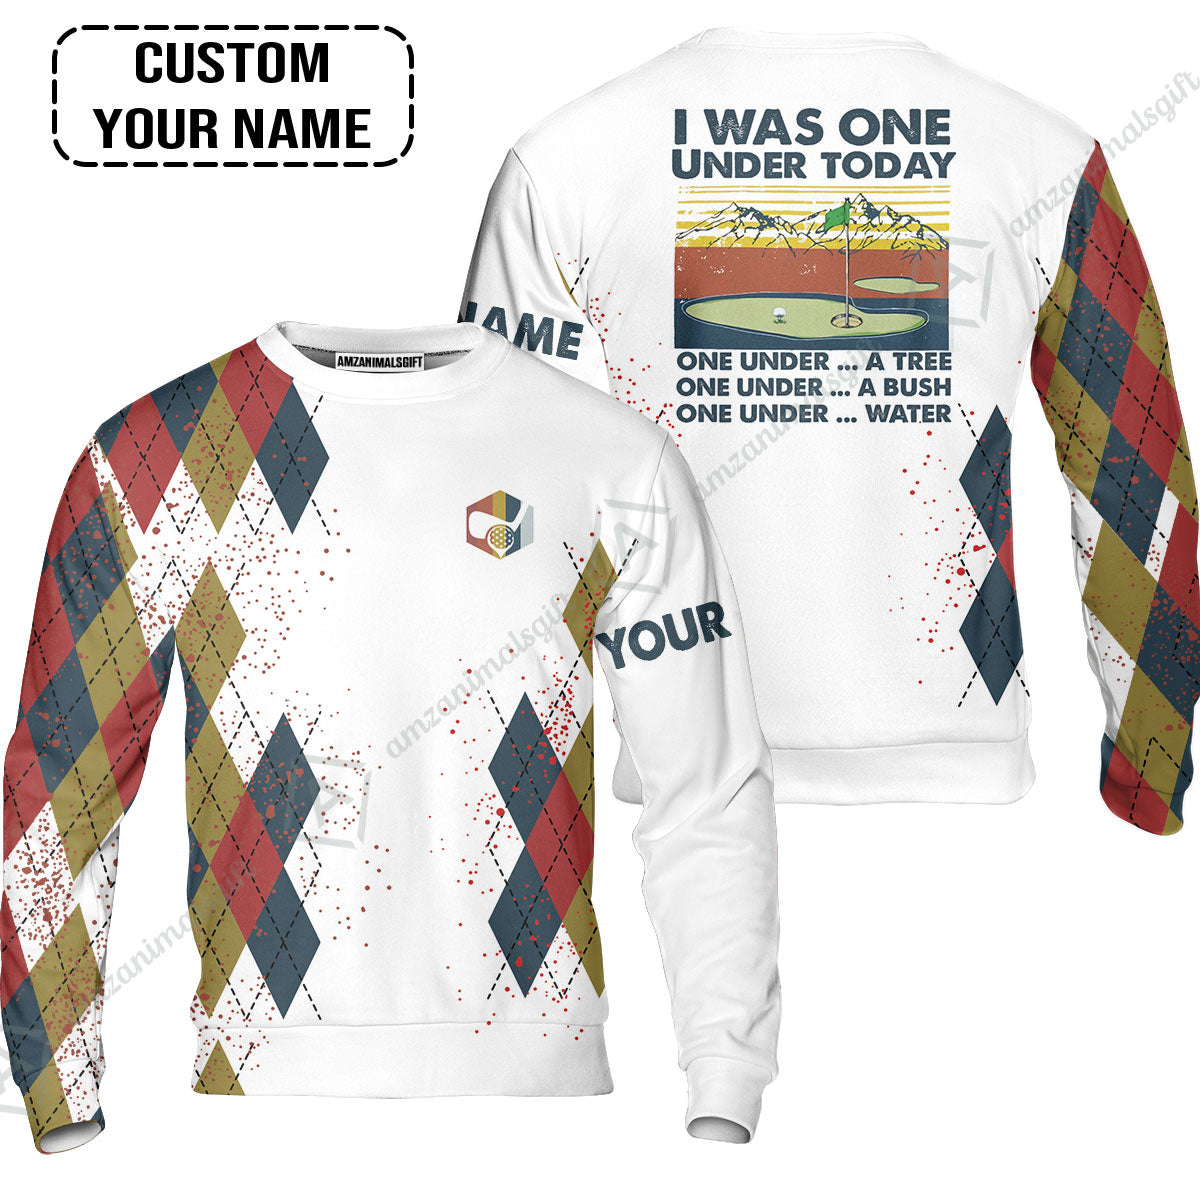 Golf Sweatshirt Custom Name - I Was One Under Today One Under A Tree Bush and Water